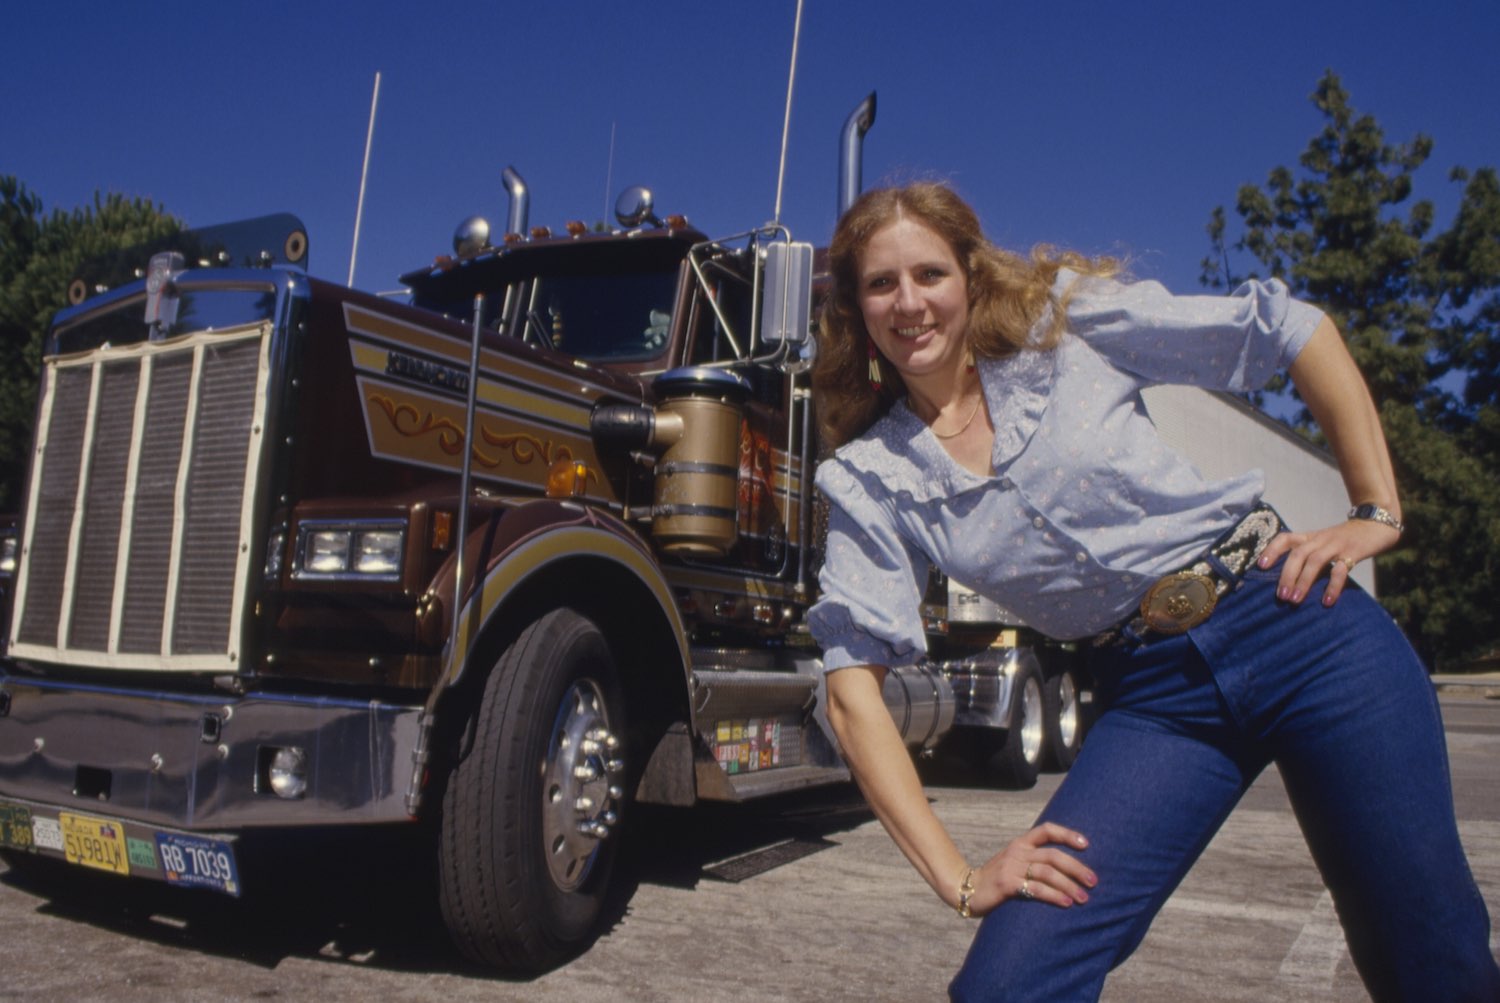 A female truck driver from Nebraska stands next to her big rig parked in California.